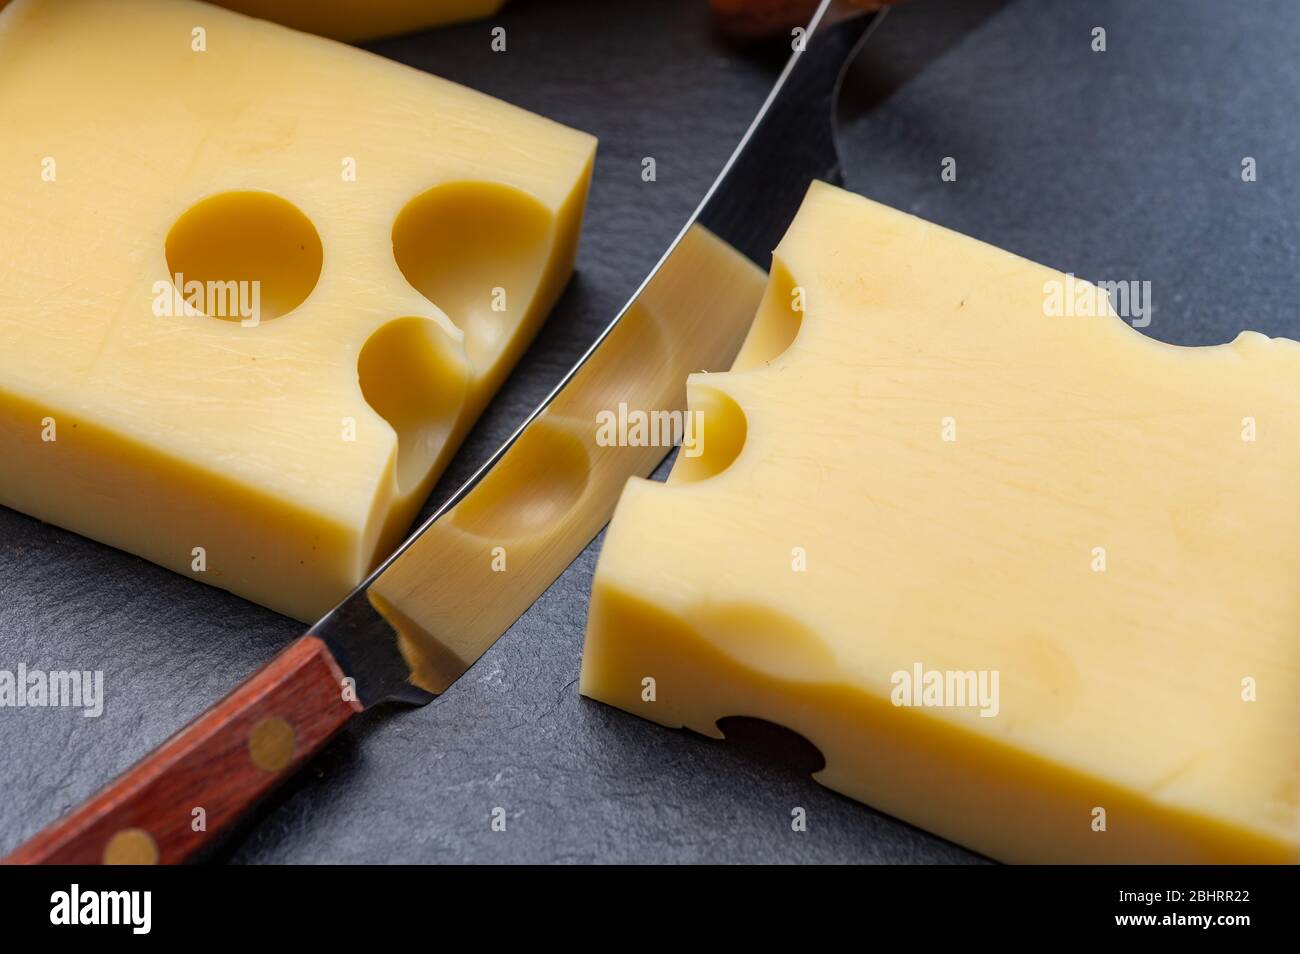 Block Of Swiss Medium Hard Yellow Cheese Emmental Or Emmentaler With Round Holes And Cheese Knife Close Up Stock Photo Alamy,Painting Baseboards